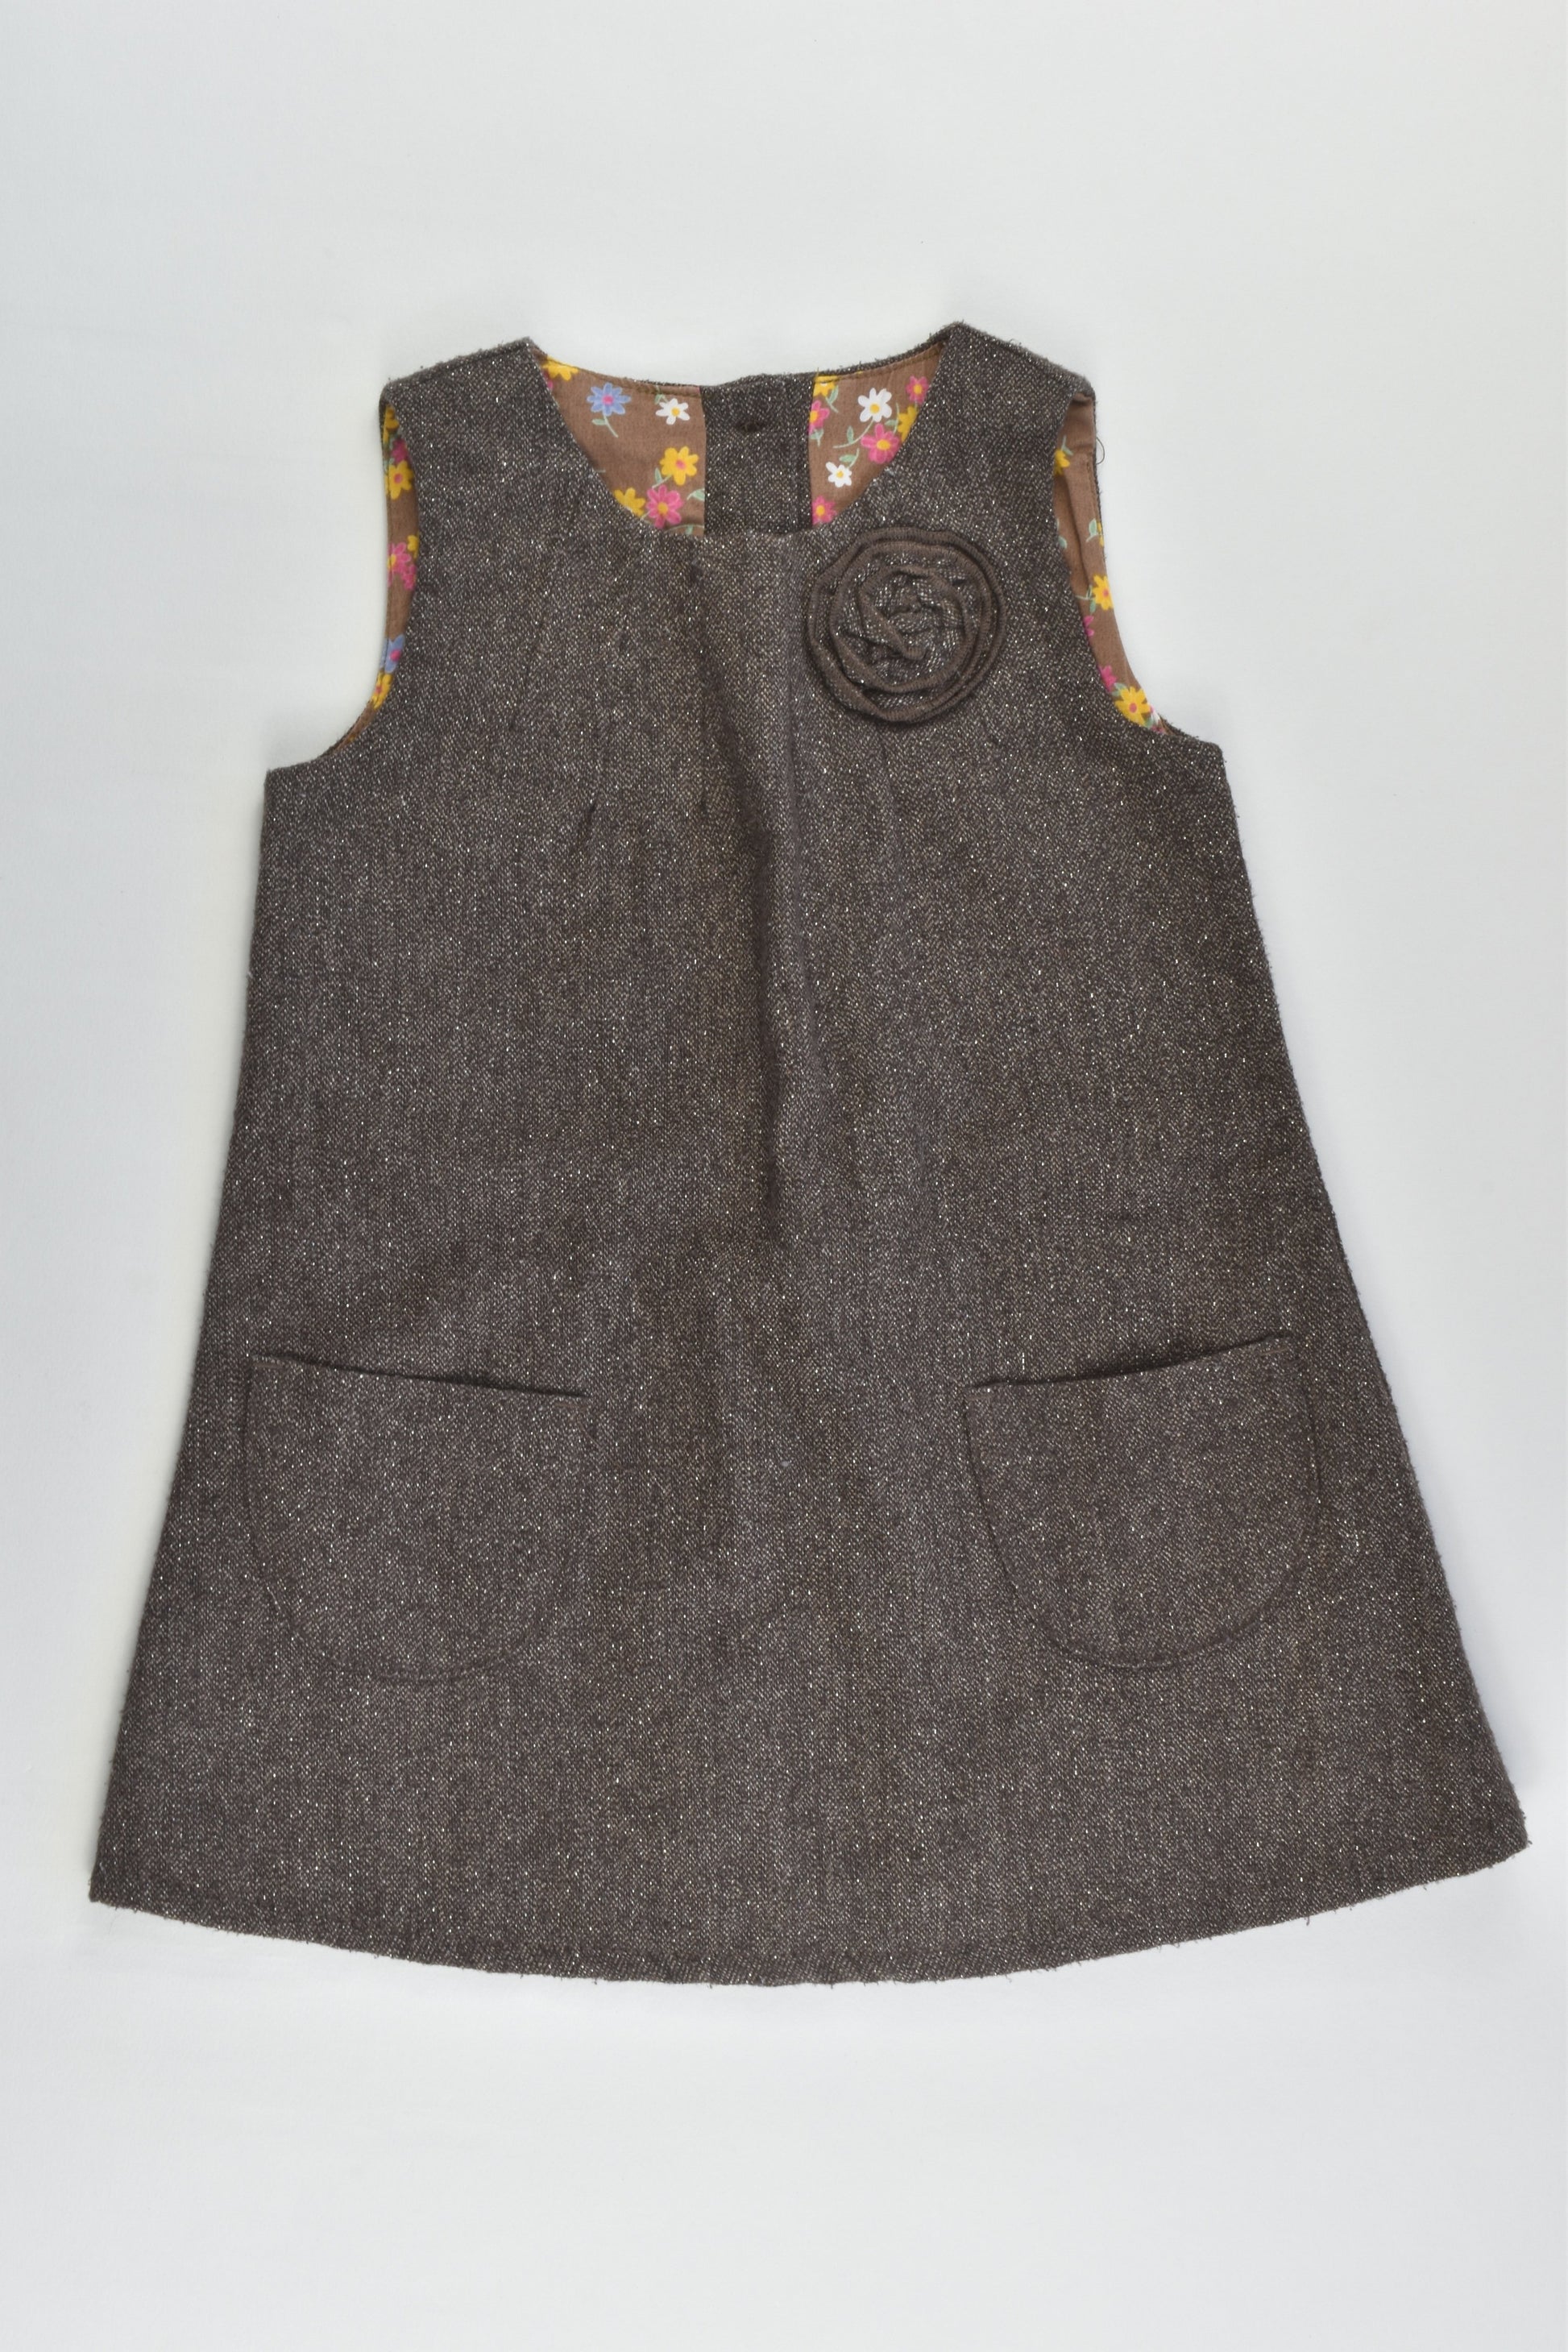 Mothercare Size 0 (6-9 months) Winter Dress with Floral Lining